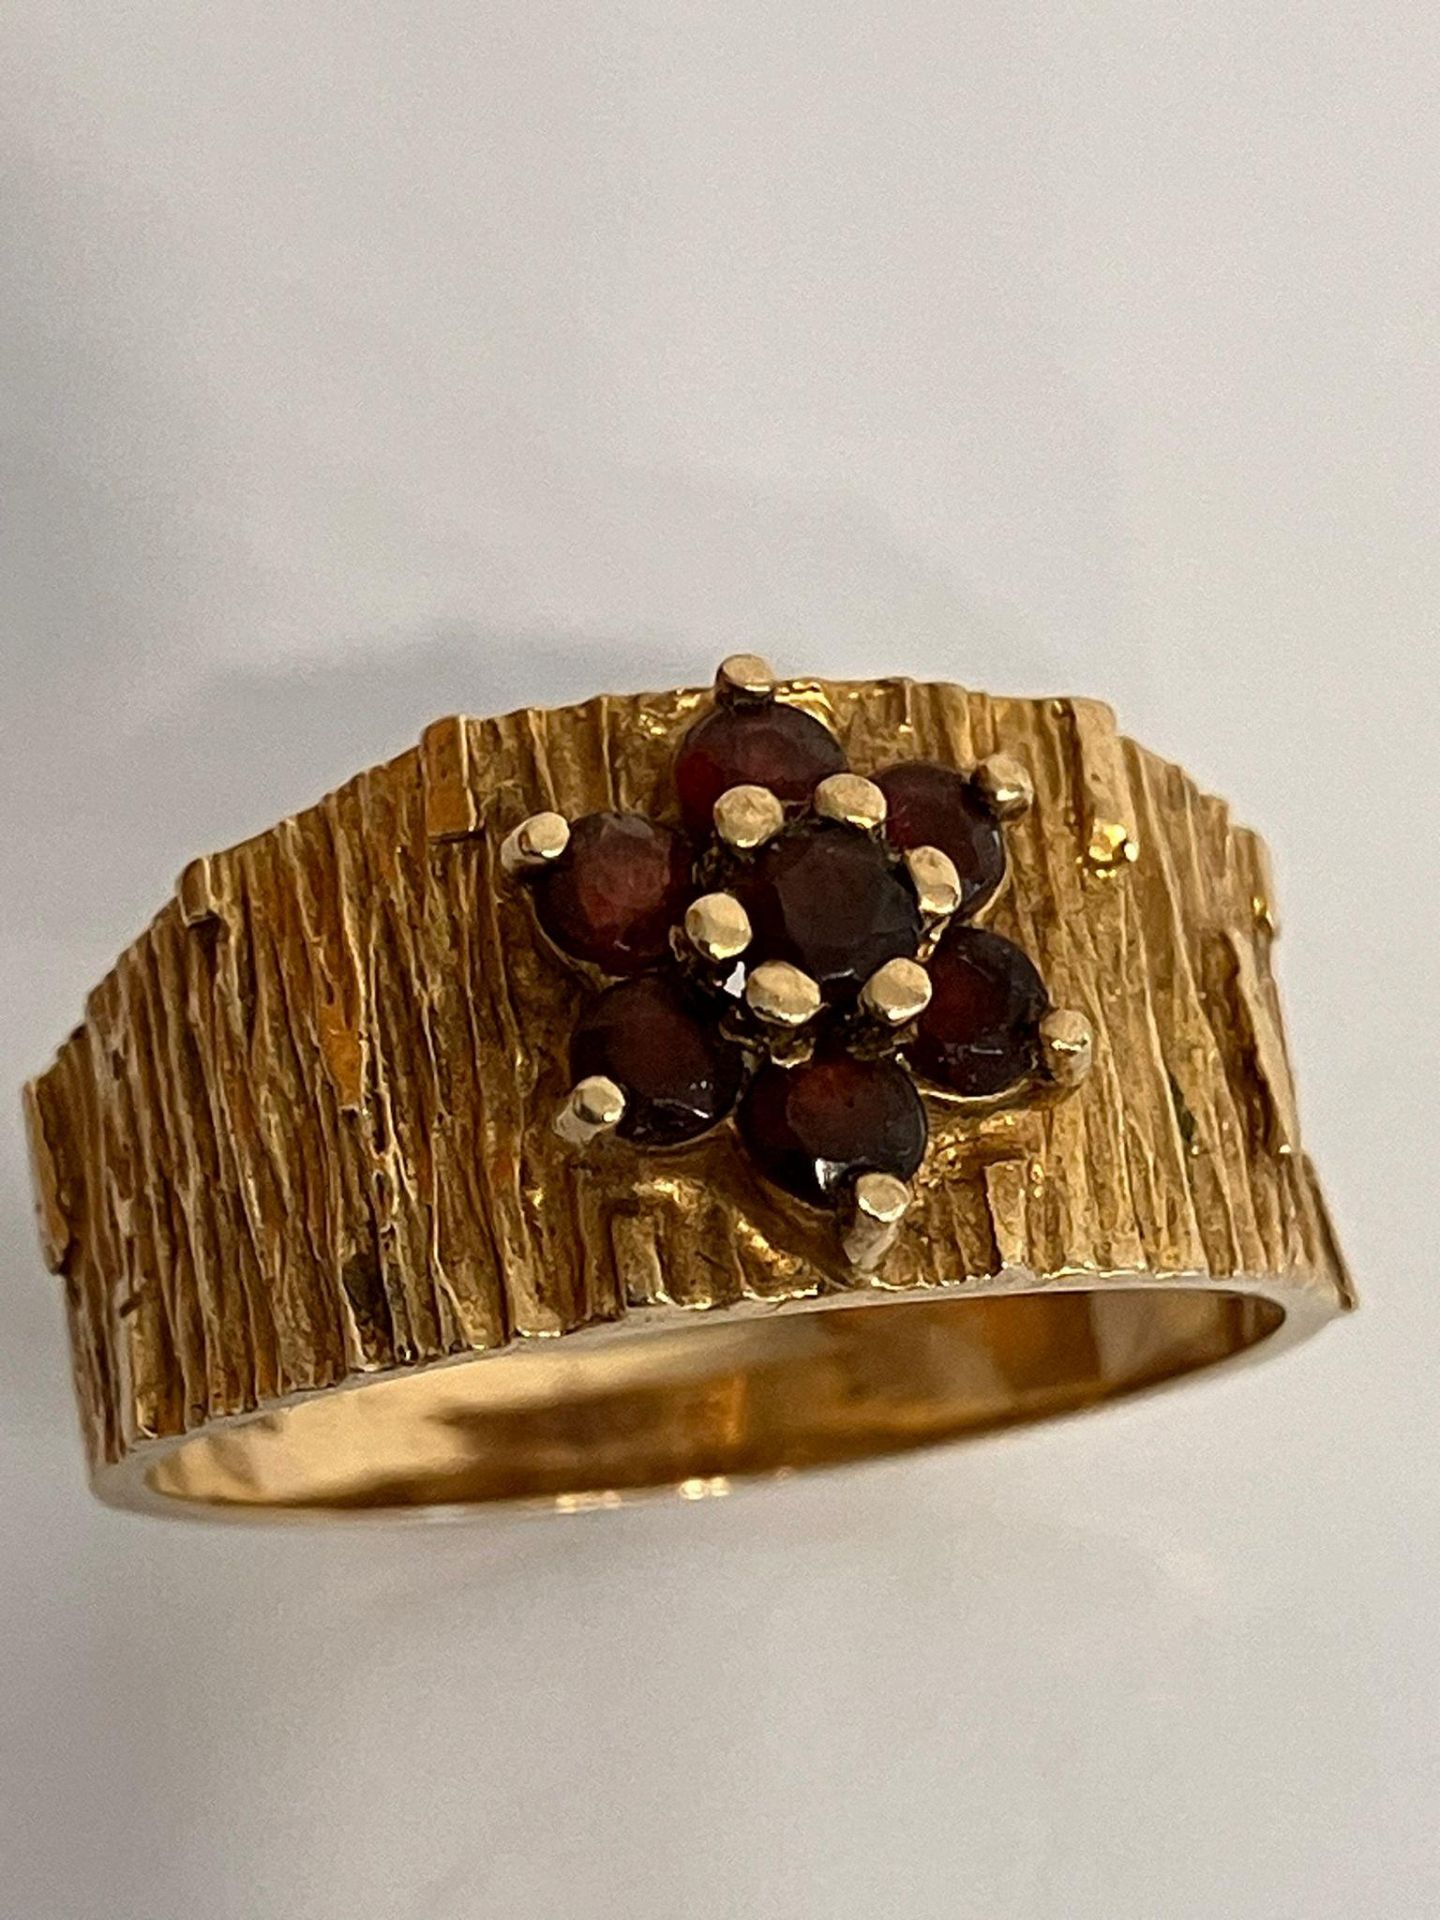 Vintage 9 carat yellow GOLD and GARNET RING, having wide textured band with attractive barked